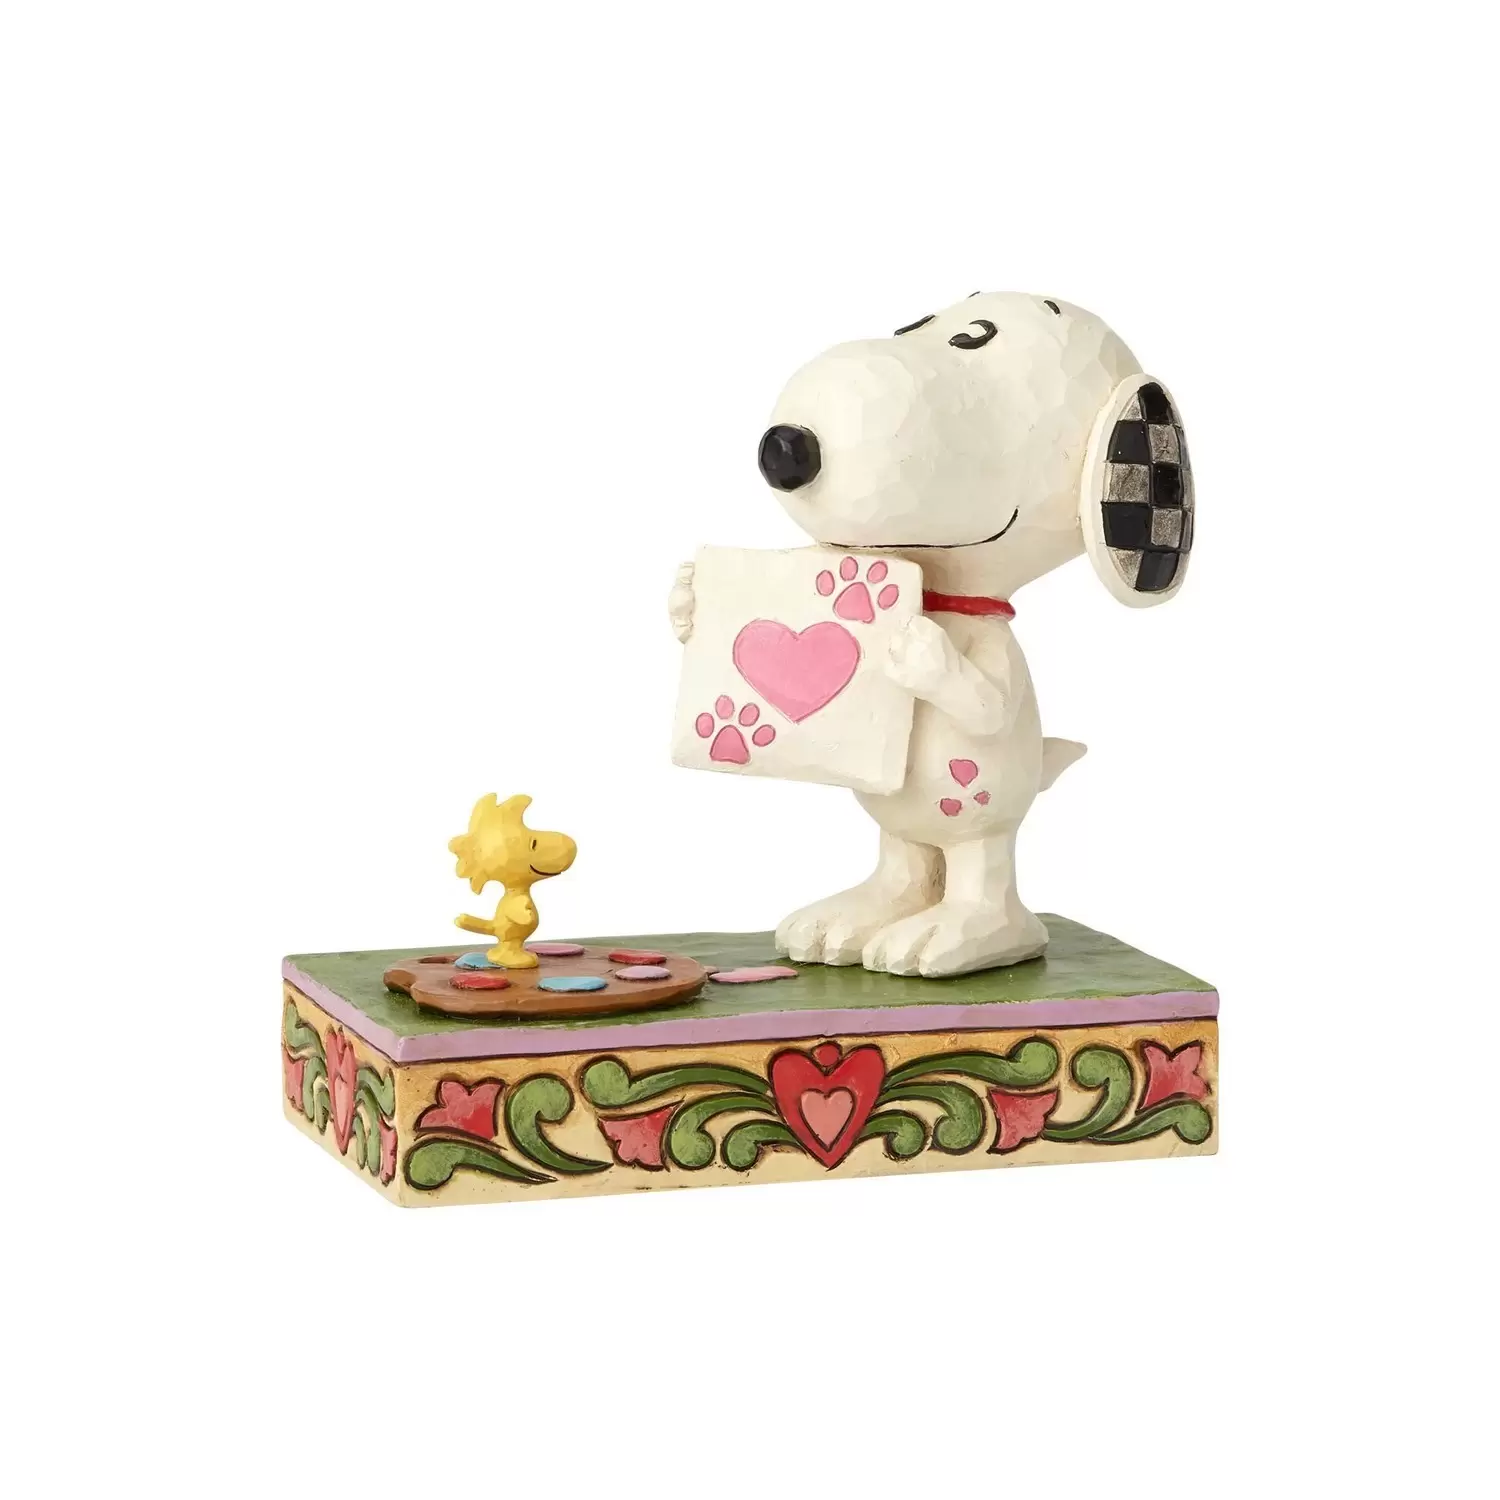 Peanuts - Jim Shore - Work of Heart - Snoopy with Woodstock